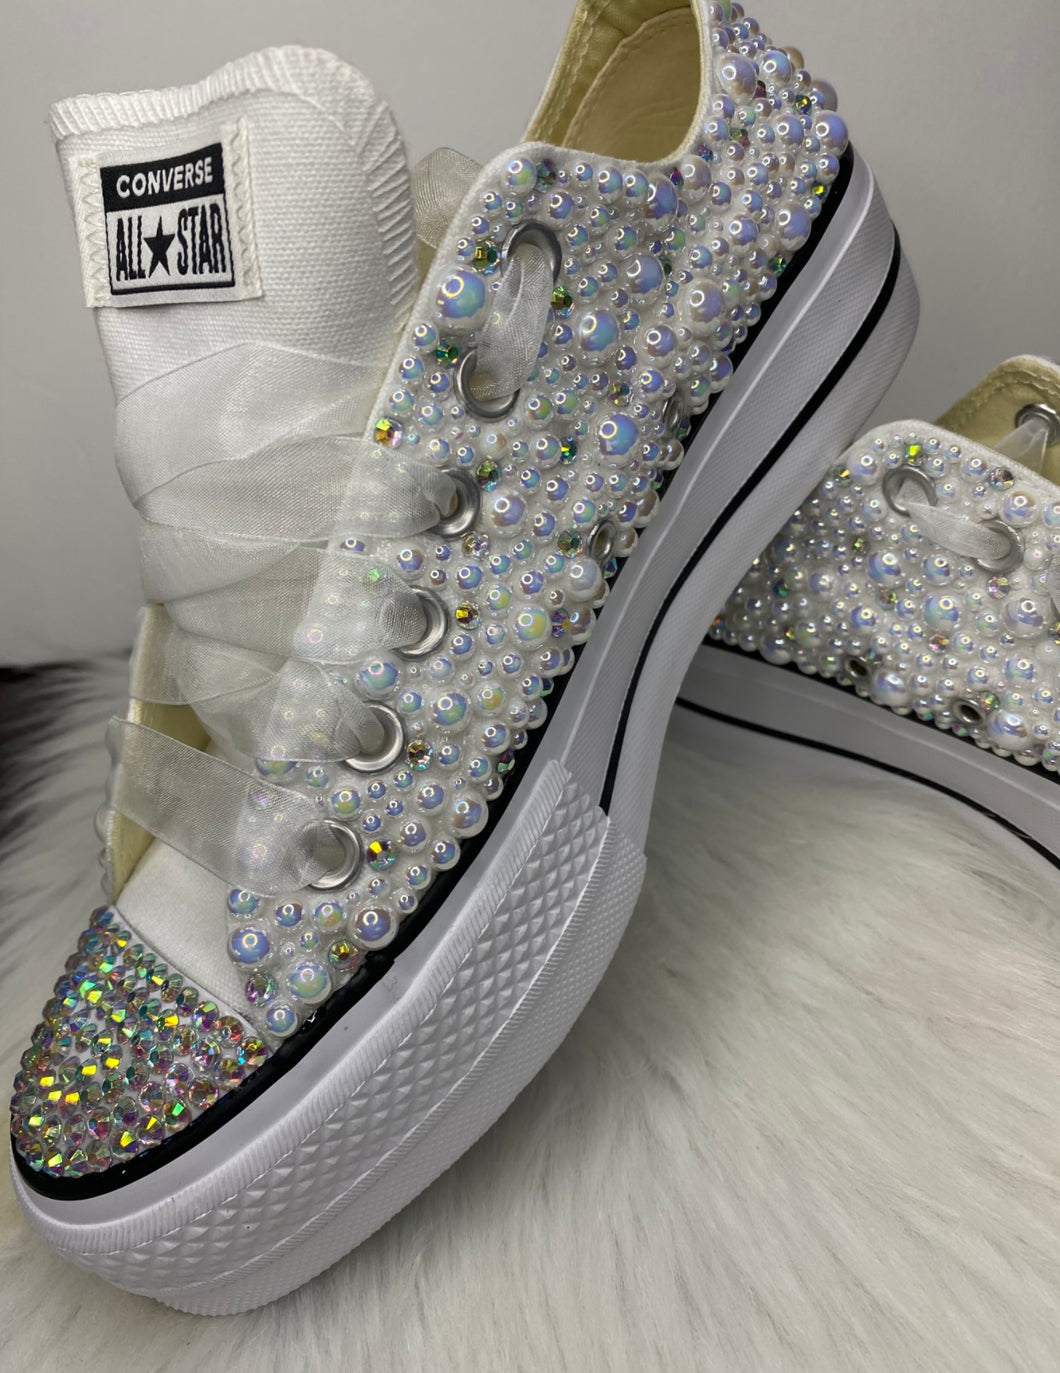 Blinged Converse